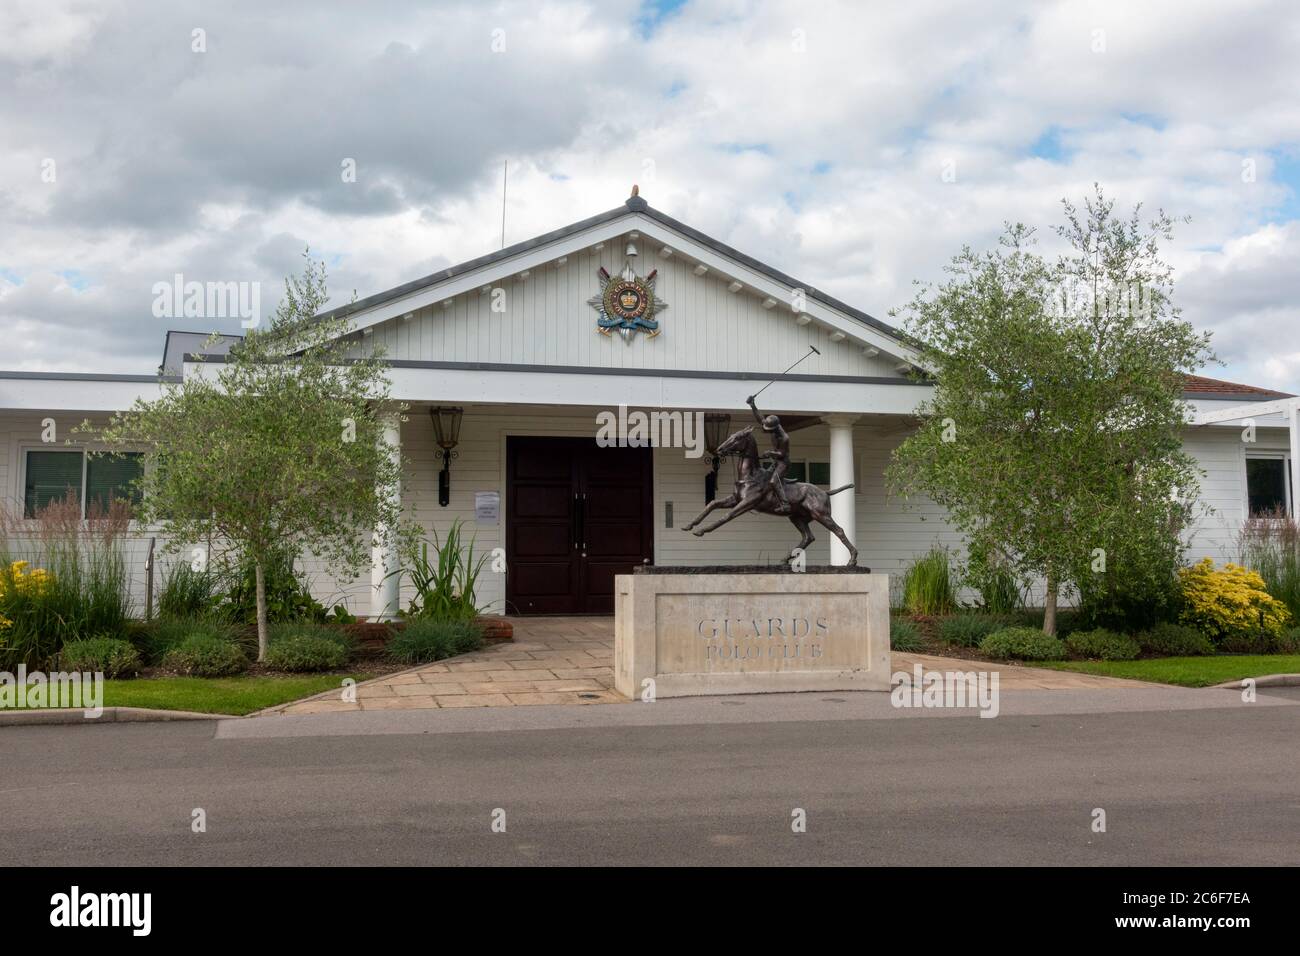 The main entrance to the Guards Polo Club, Smiths Lawn, Windsor Great Park, UK Stock Photo